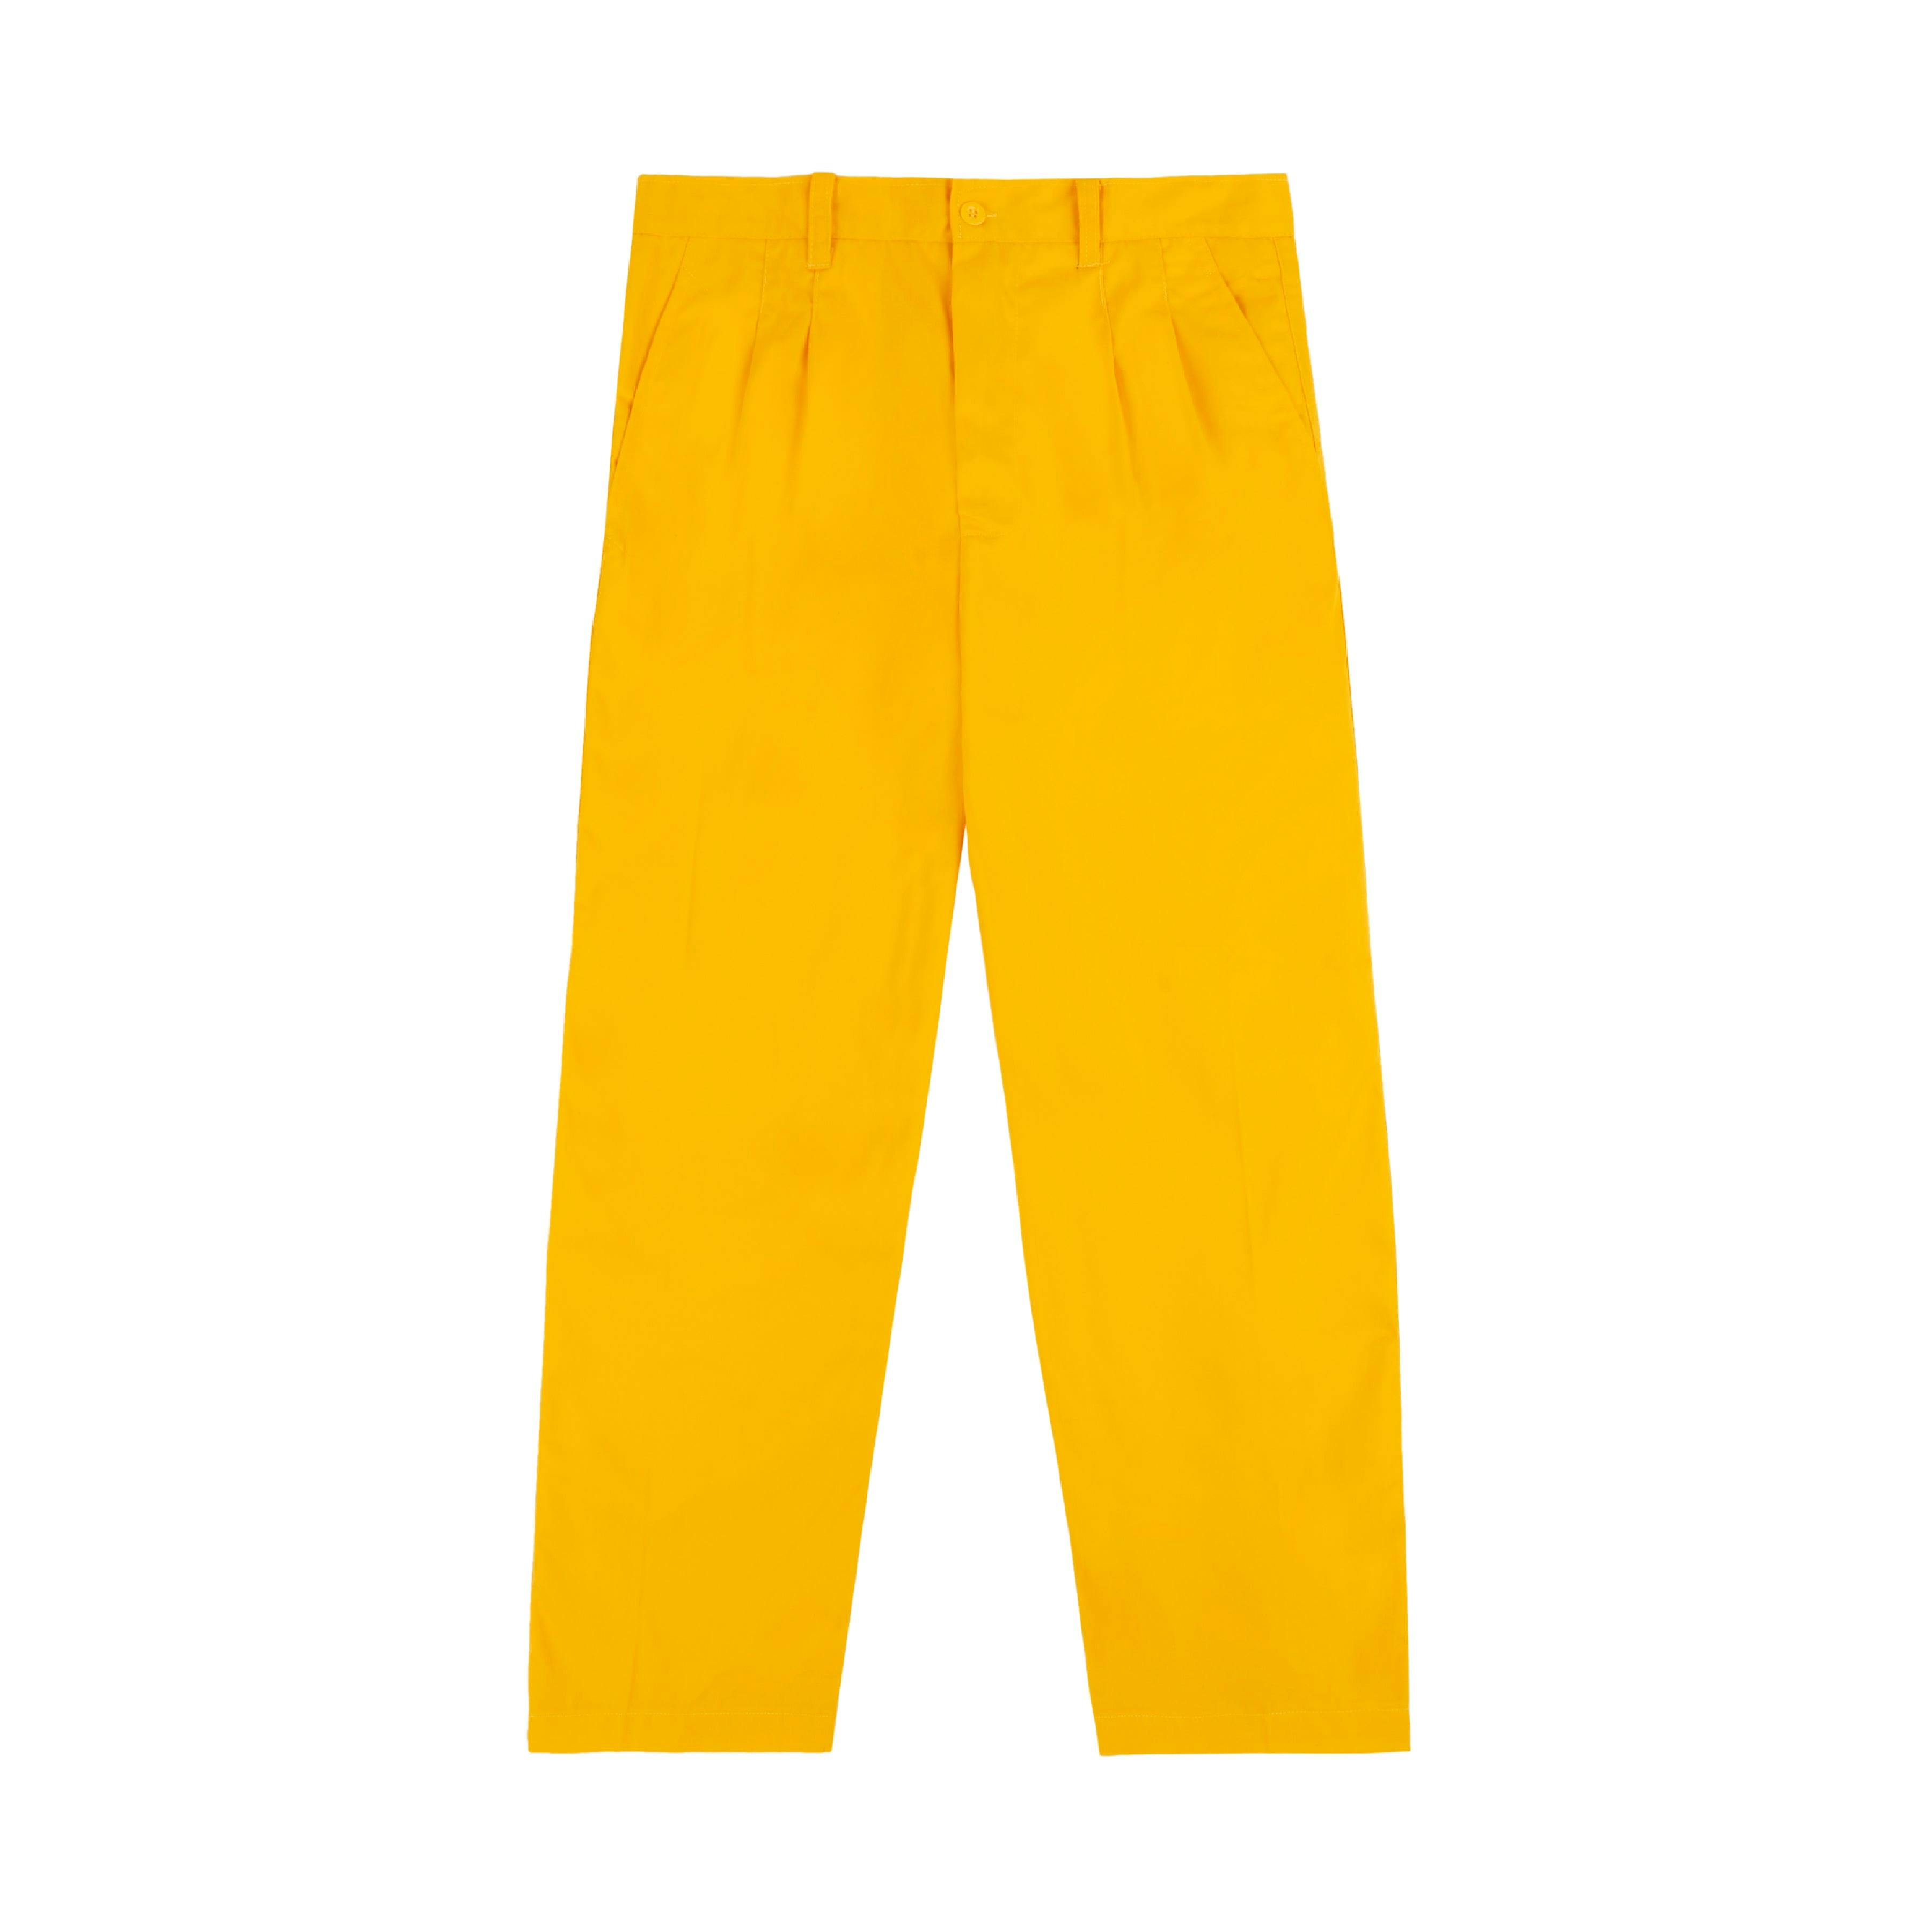 a yellow work pant = 1 of 8